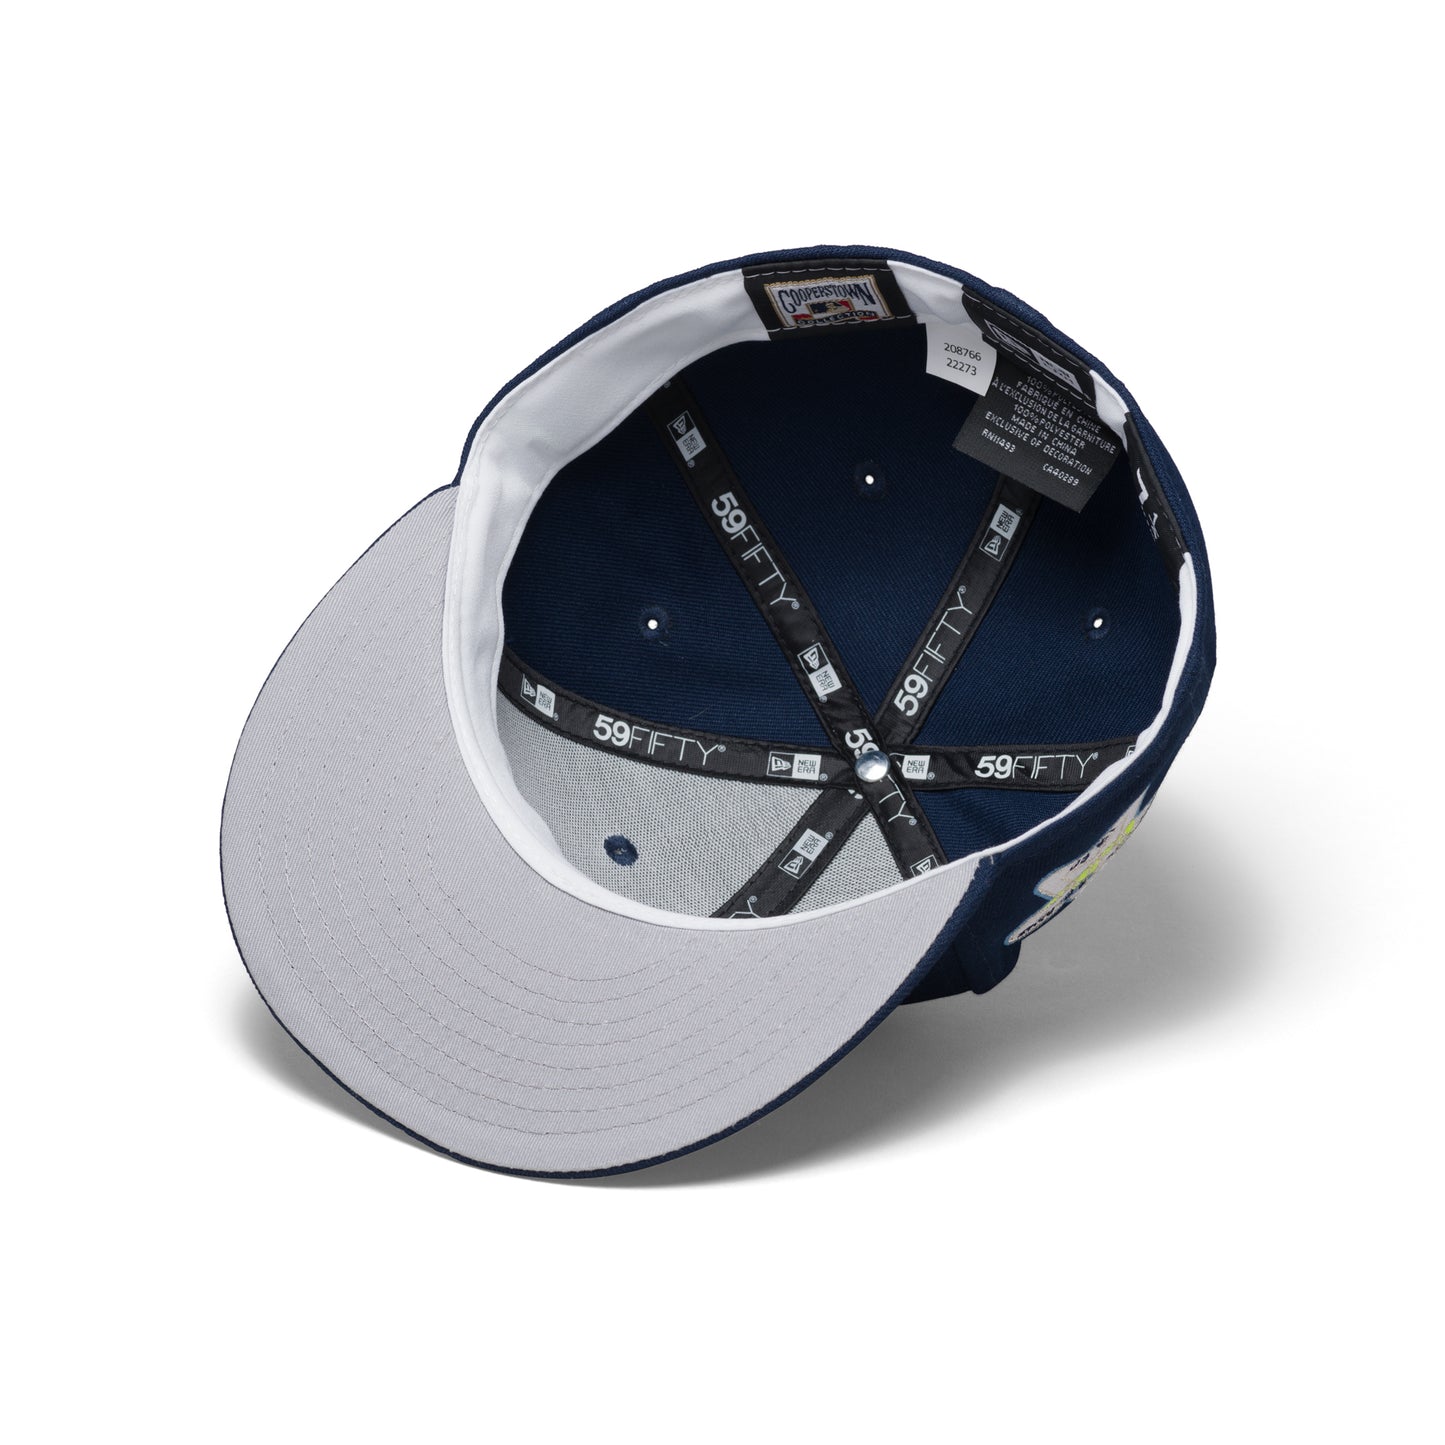 Concepts x New Era 59Fifty New Yankees 1961 All Star Game Fitted Hat (Blue)